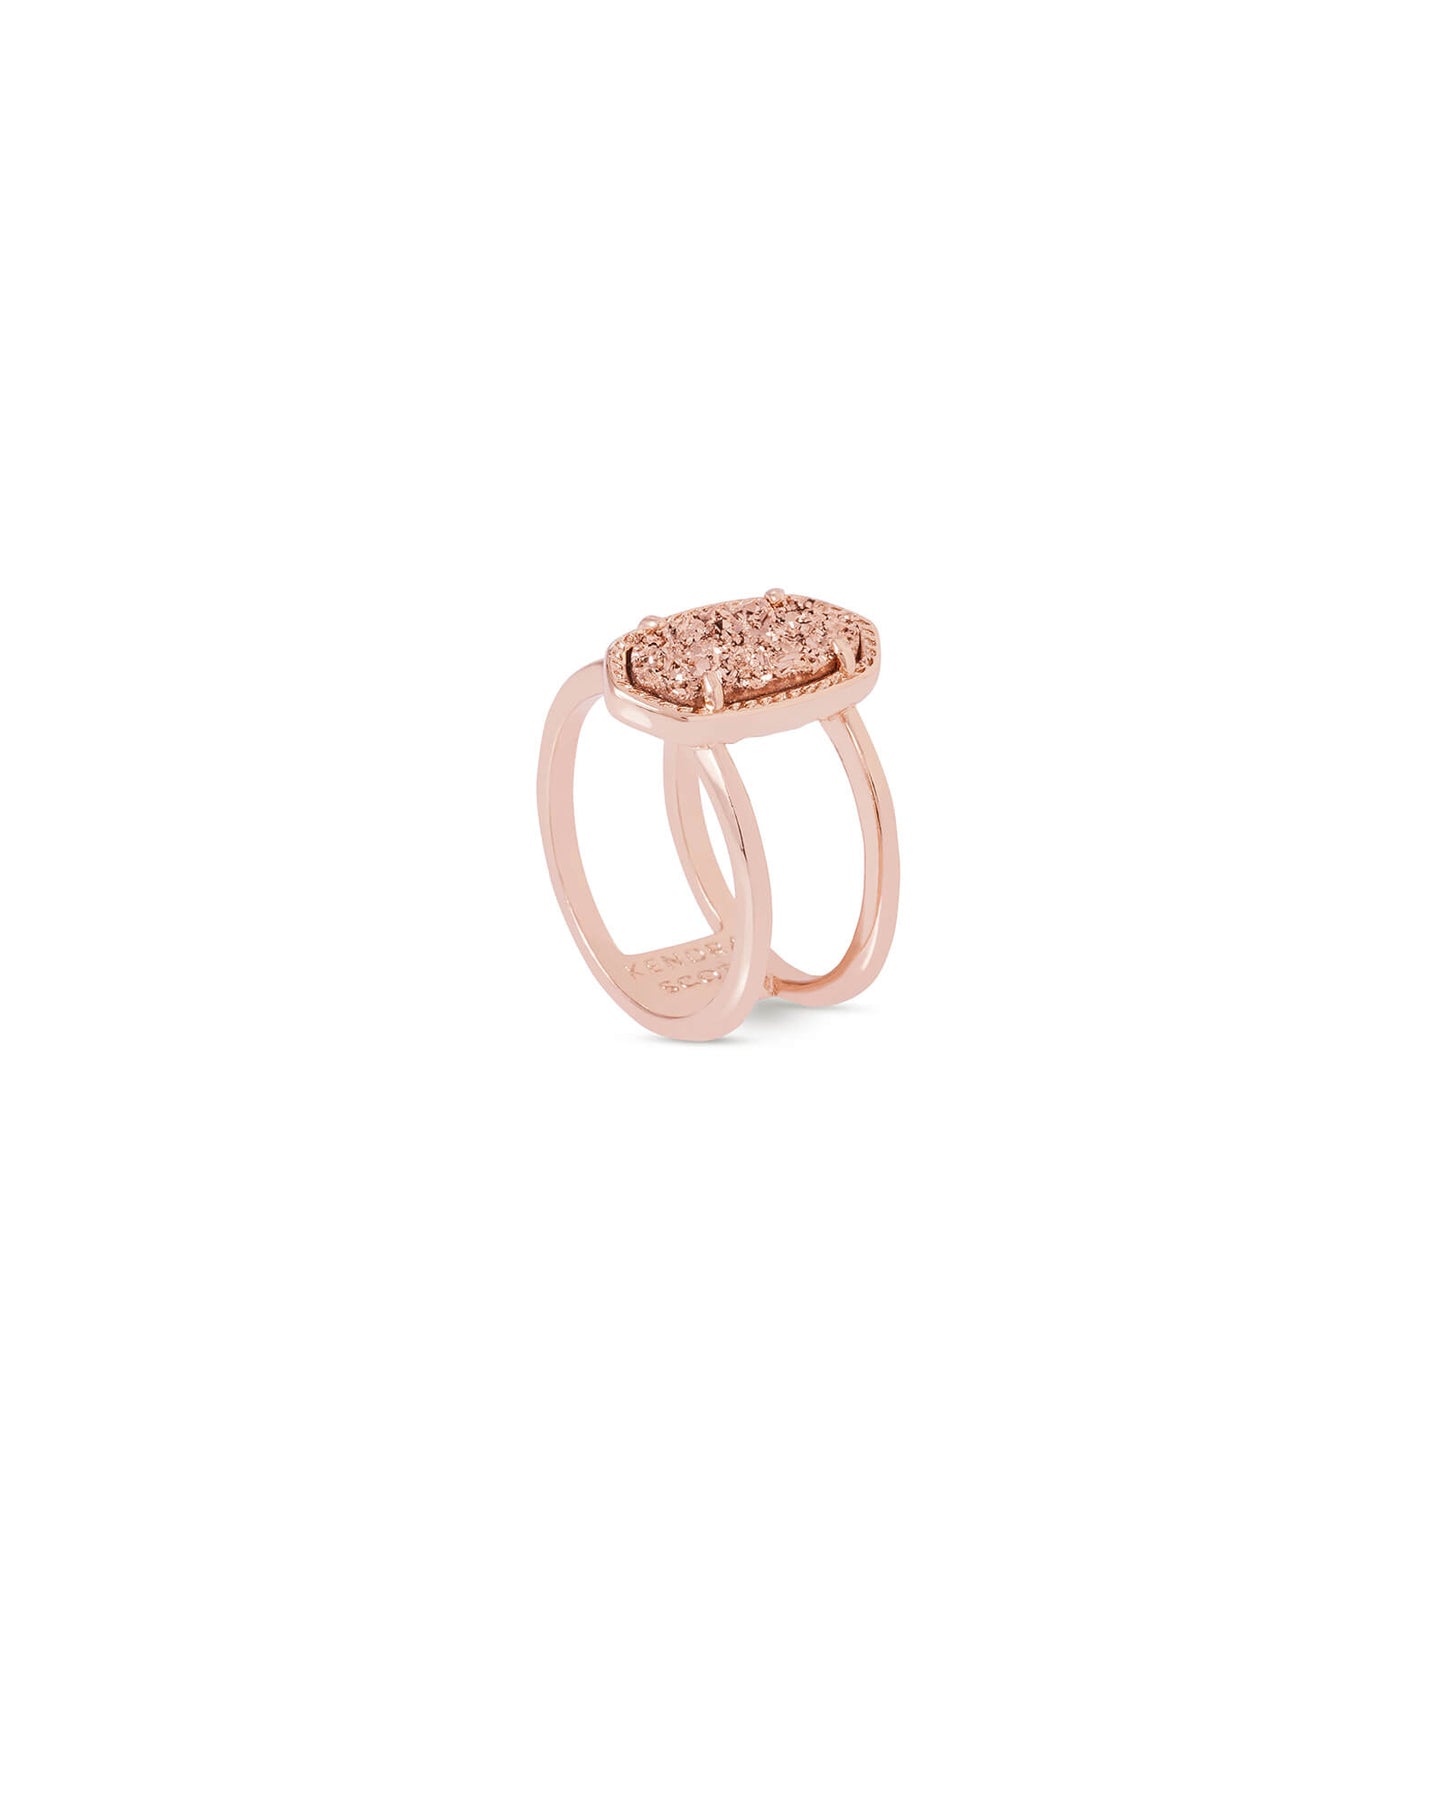 Kendra Scott Elyse Double Band Rose Gold Ring - Rose Gold Drusy-Rings-Kendra Scott-APRIL2022, KS, R1052RSG-The Twisted Chandelier